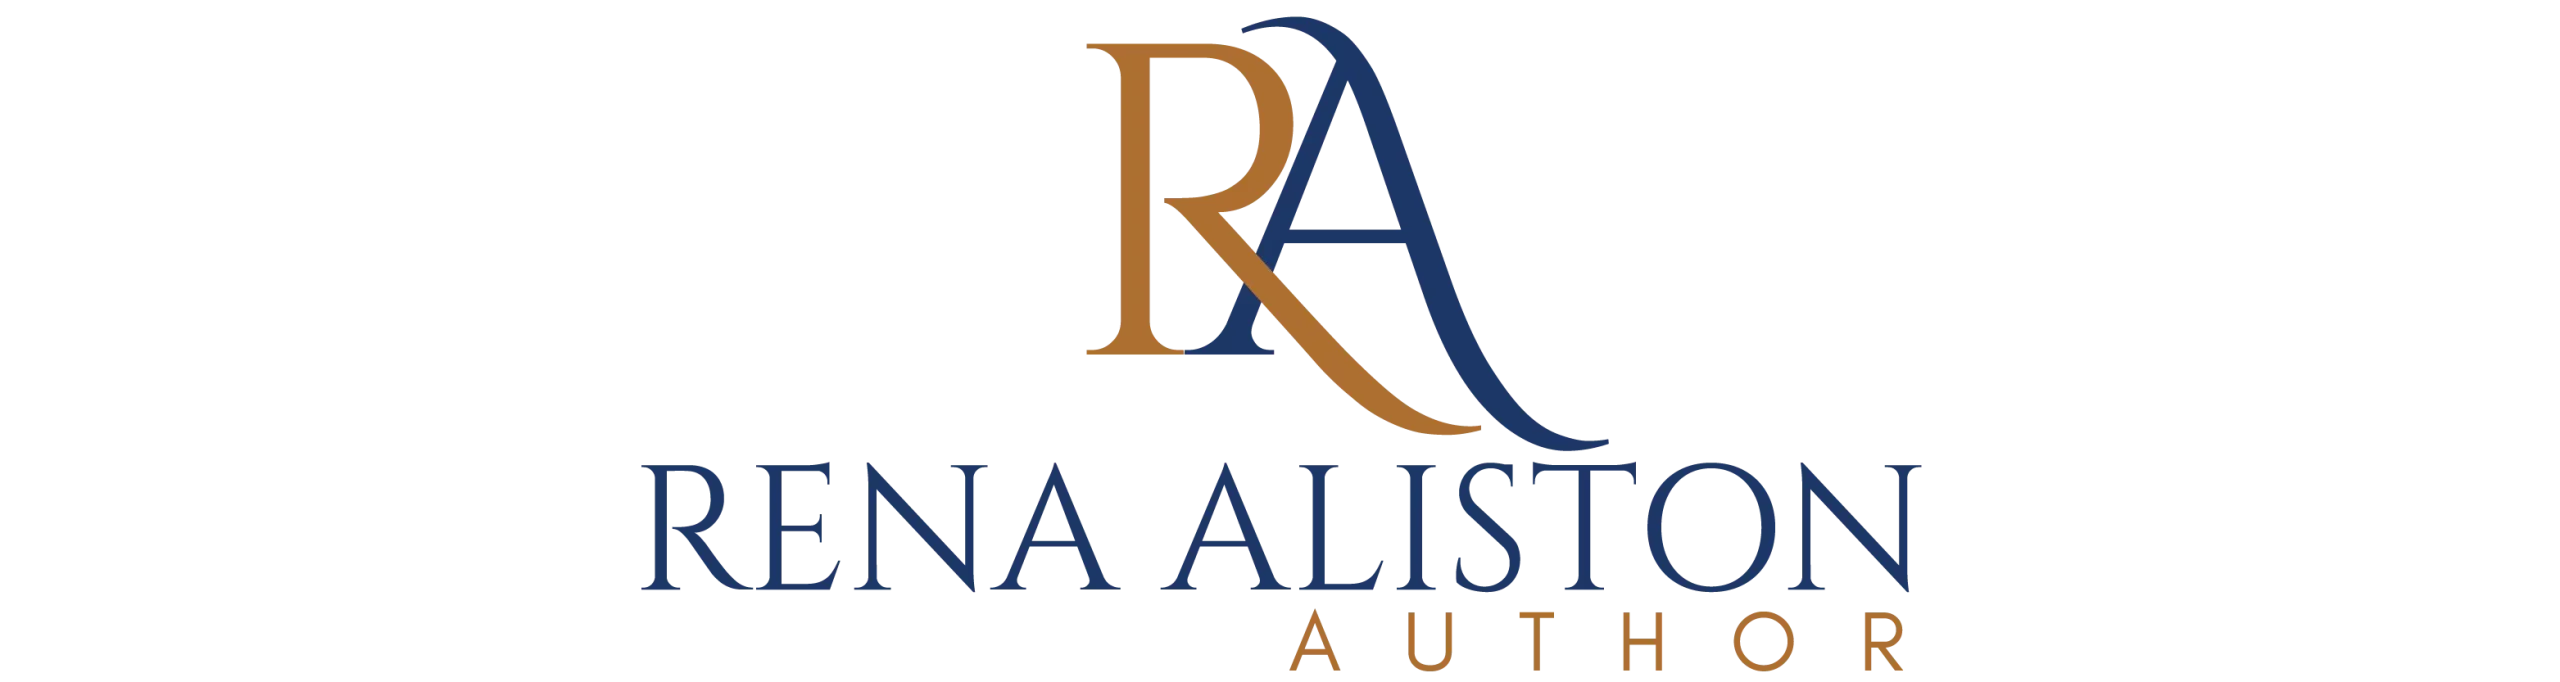 Official Website of Crime, Thriller, and Horror Author Rena Aliston